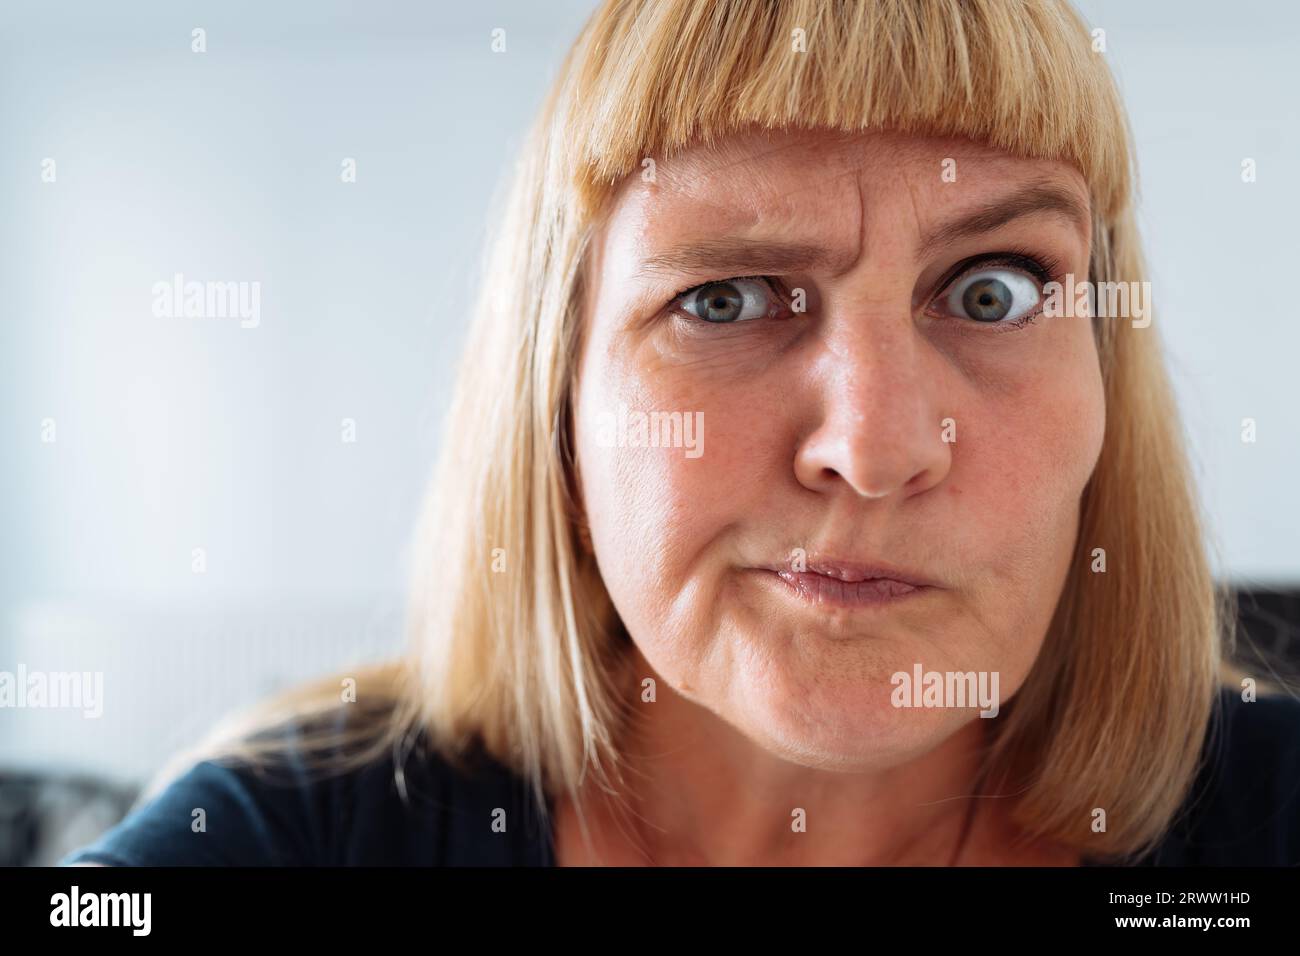 Portrait middle-aged woman, blonde, grimacing in front mirror Stock Photo